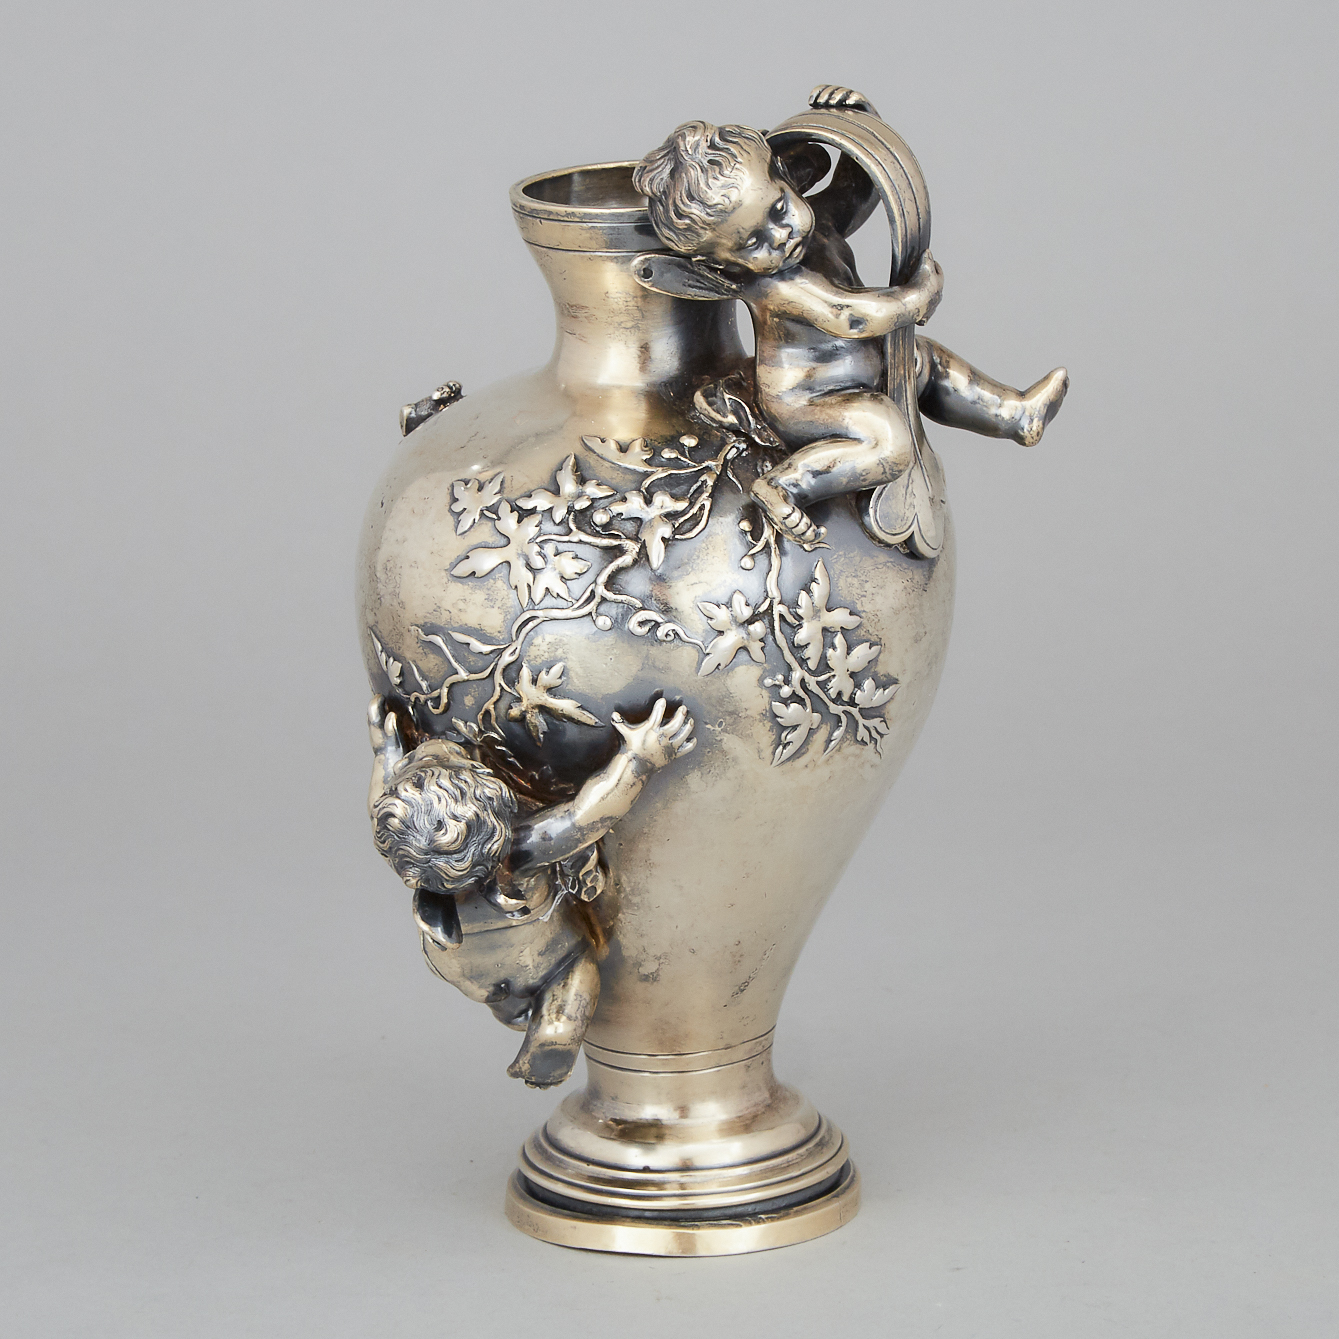 French Silvered Bronze Mantle Vase by Auguste Moreau, 19th century